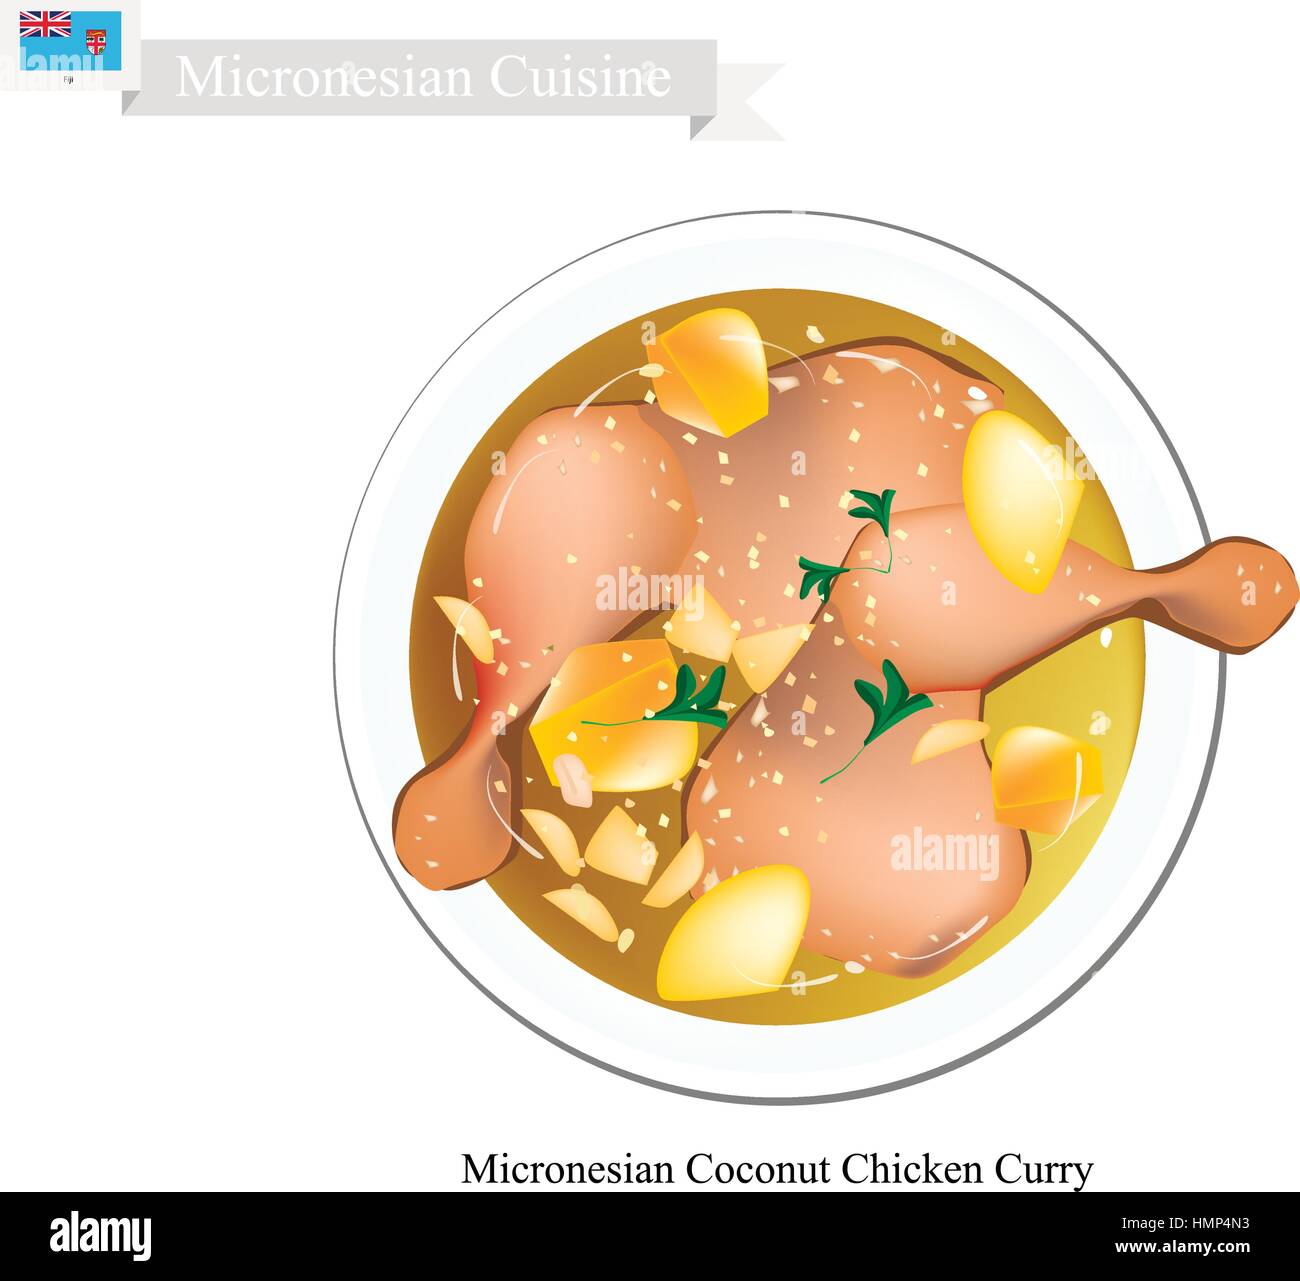 Micronesian Cuisine, Illustration of Traditional Coconut Chicken Curry Made of Chicken, Potatoes, Curry, Coconut Milk, Ginger and Garlic. One of The M Stock Vector